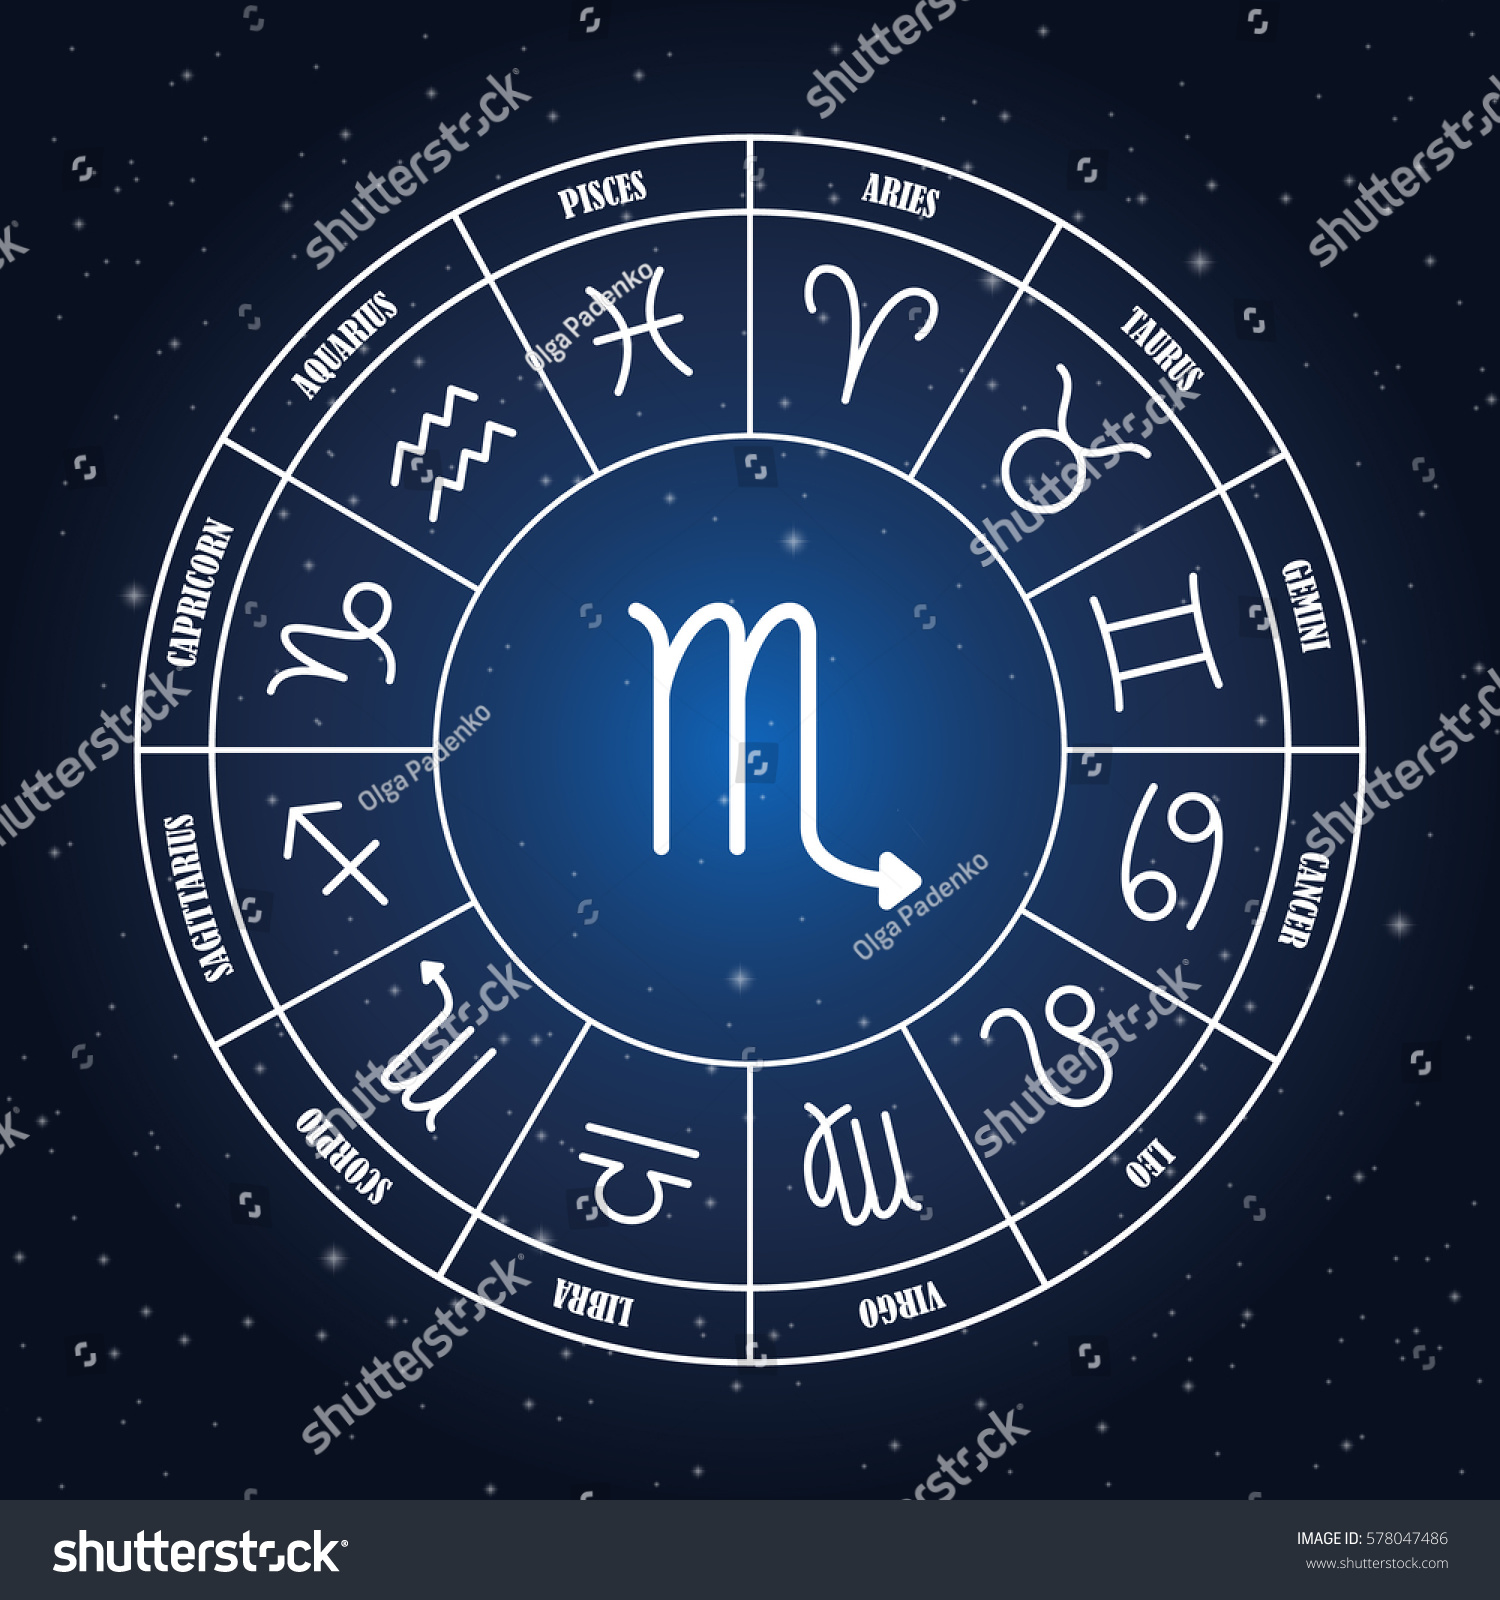 Virgo astrology sing in zodiac circle on the Royalty Free Stock